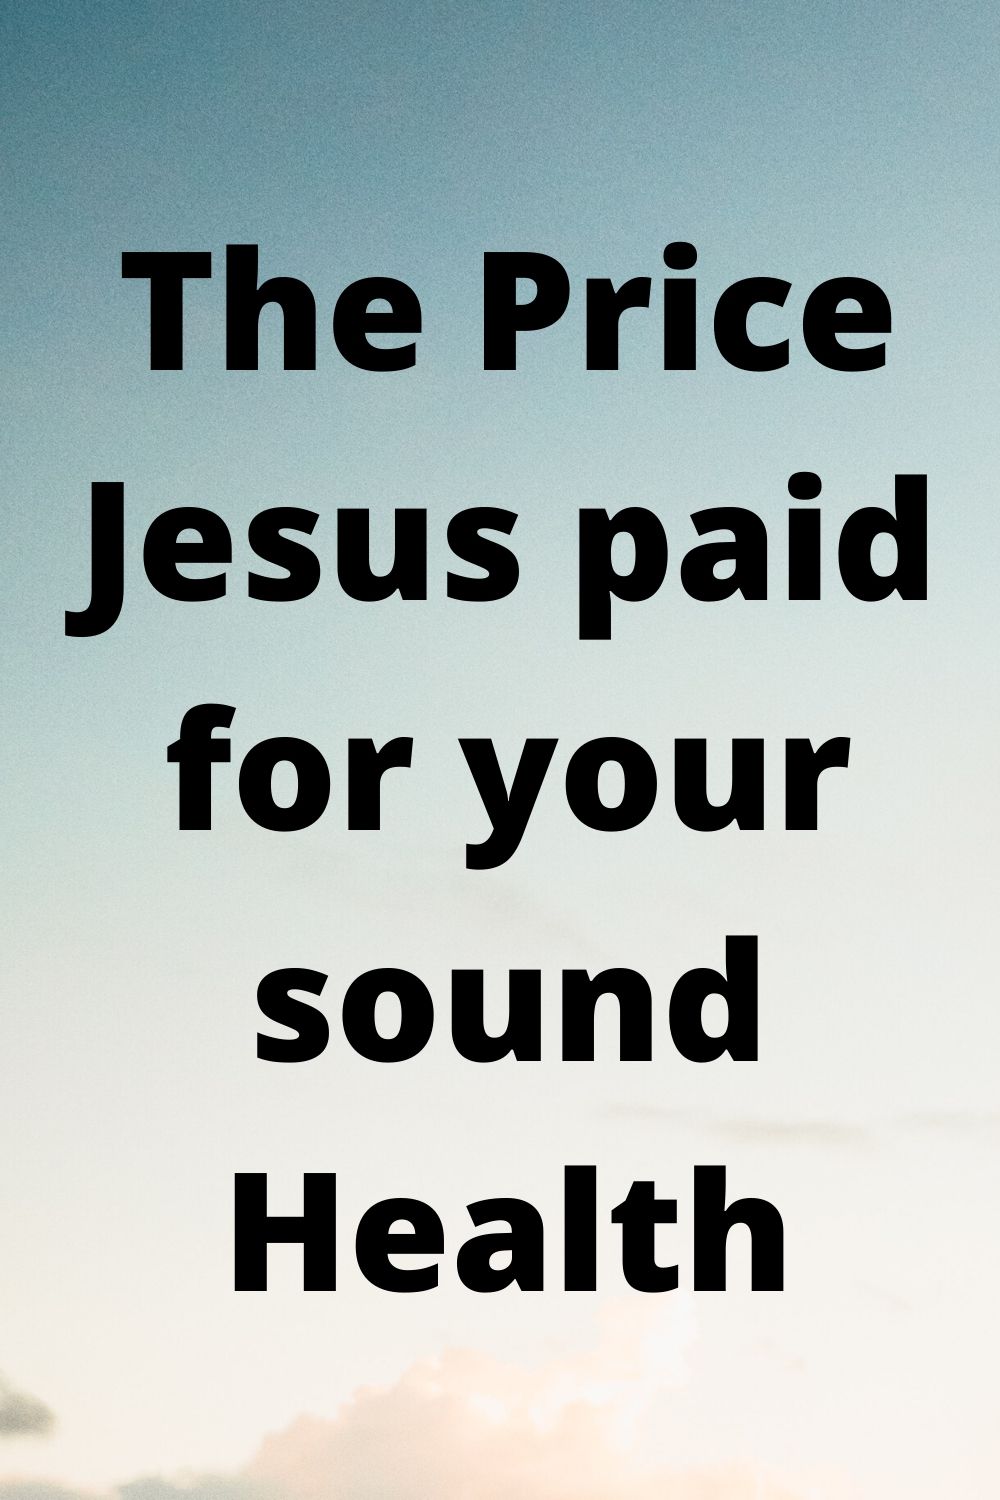 Sin; The price Jesus paid for your sound health.